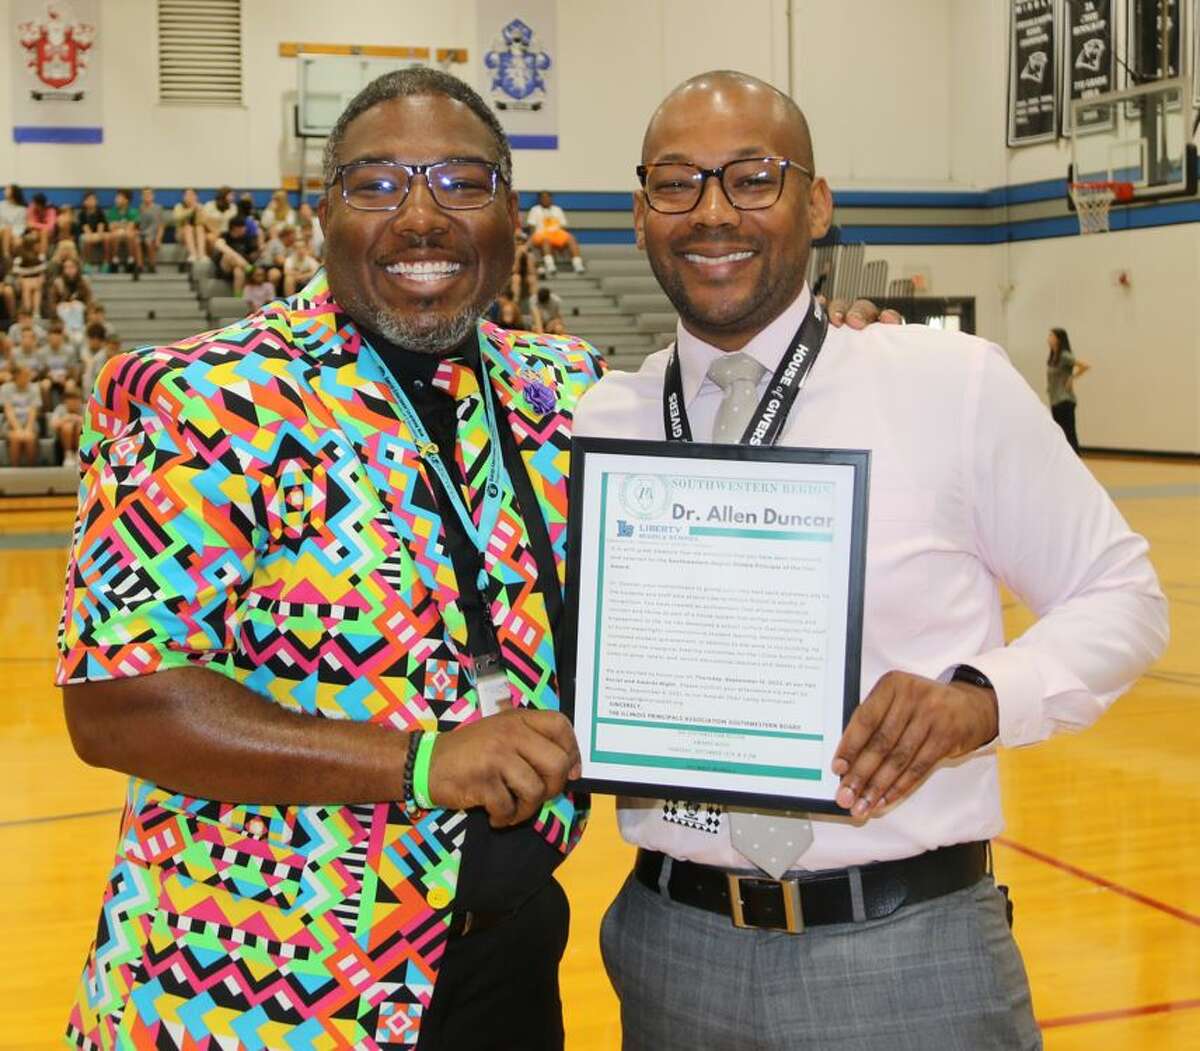 Dr. Tron Young, principal at Joseph Arthur Middle School in O’Fallon, Illinois, presents Dr. Allen Duncan, principal at Liberty Middle School in Edwardsville, with his award for being named the Illinois Principals Association Southwestern Region Principal of the Year.